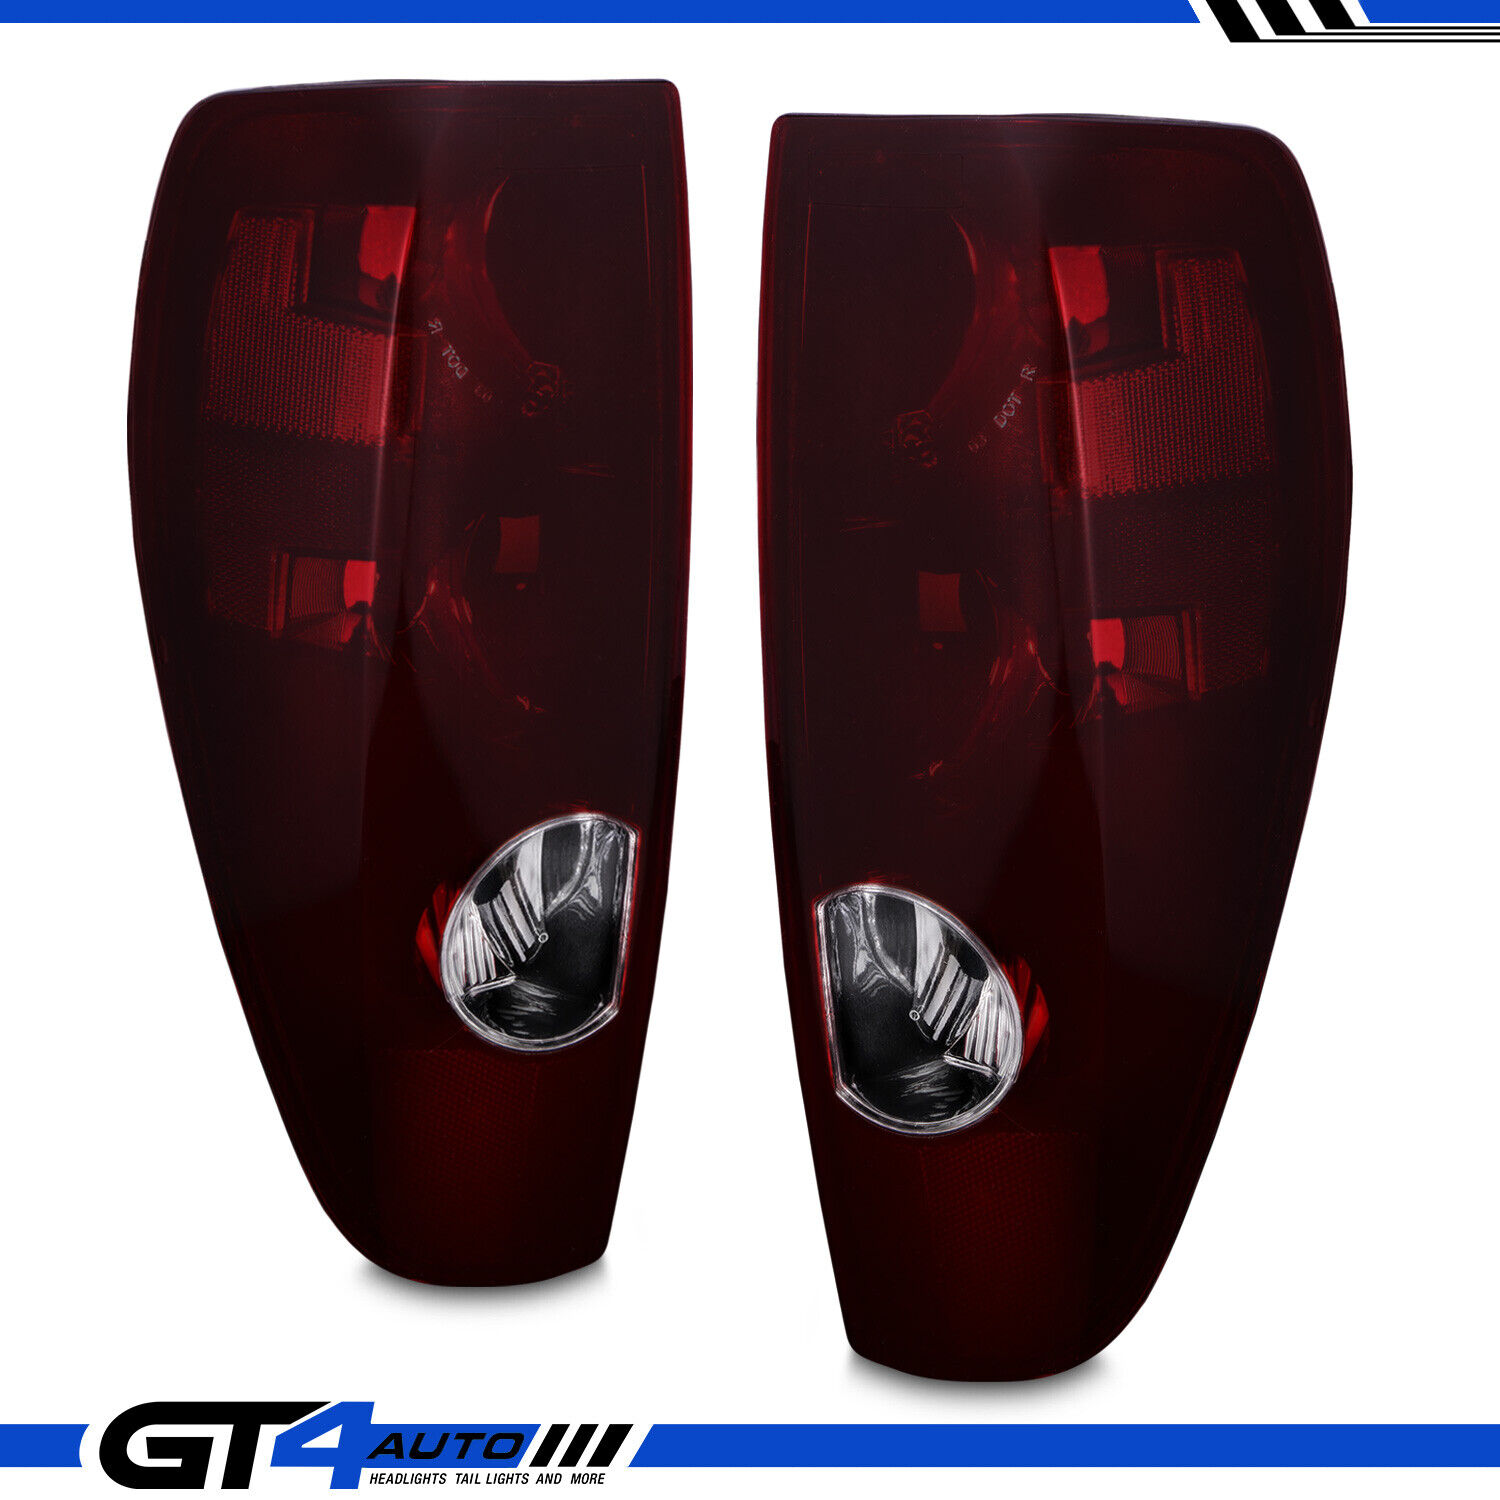 Dark Red OE Rear Brake Tail Lights Set For 2004-2012 Chevy Colorado/GMC Canyon